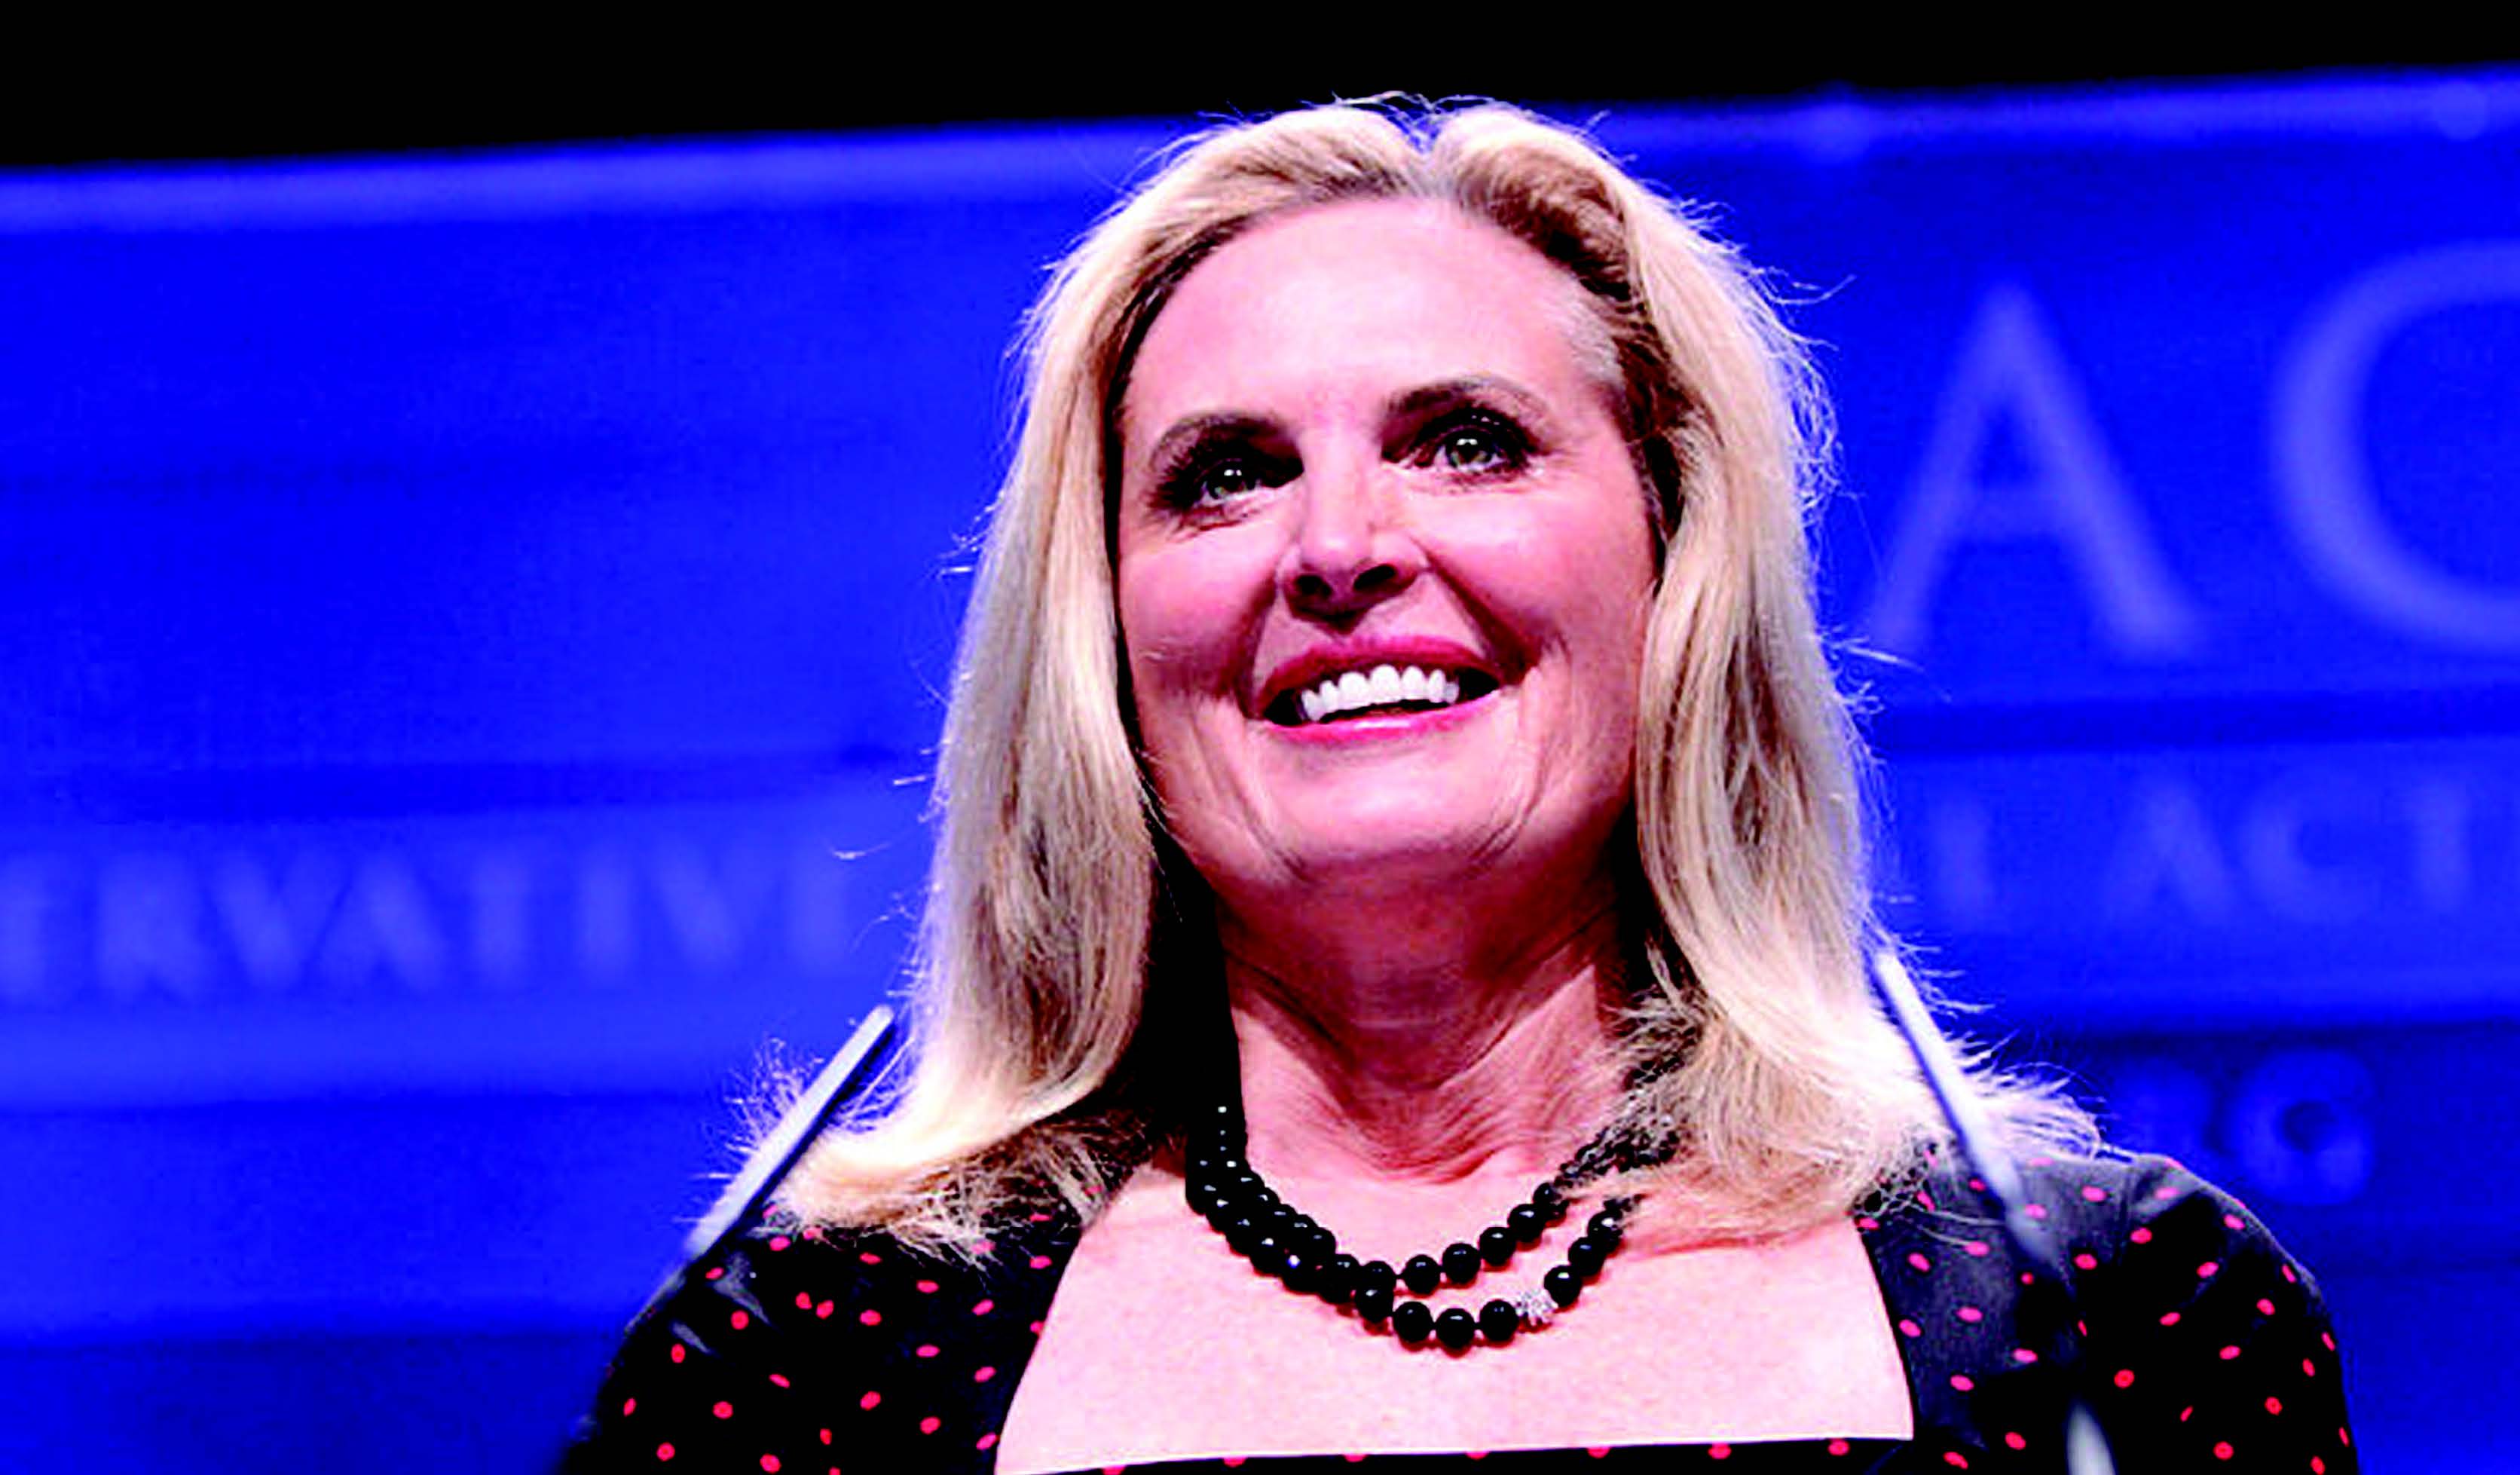 Ann Romney, wife of former Governor Mitt Romney, speaking at CPAC 2011 in Washington, D.C. (Gage Skidmore/Wikimedia Commons)